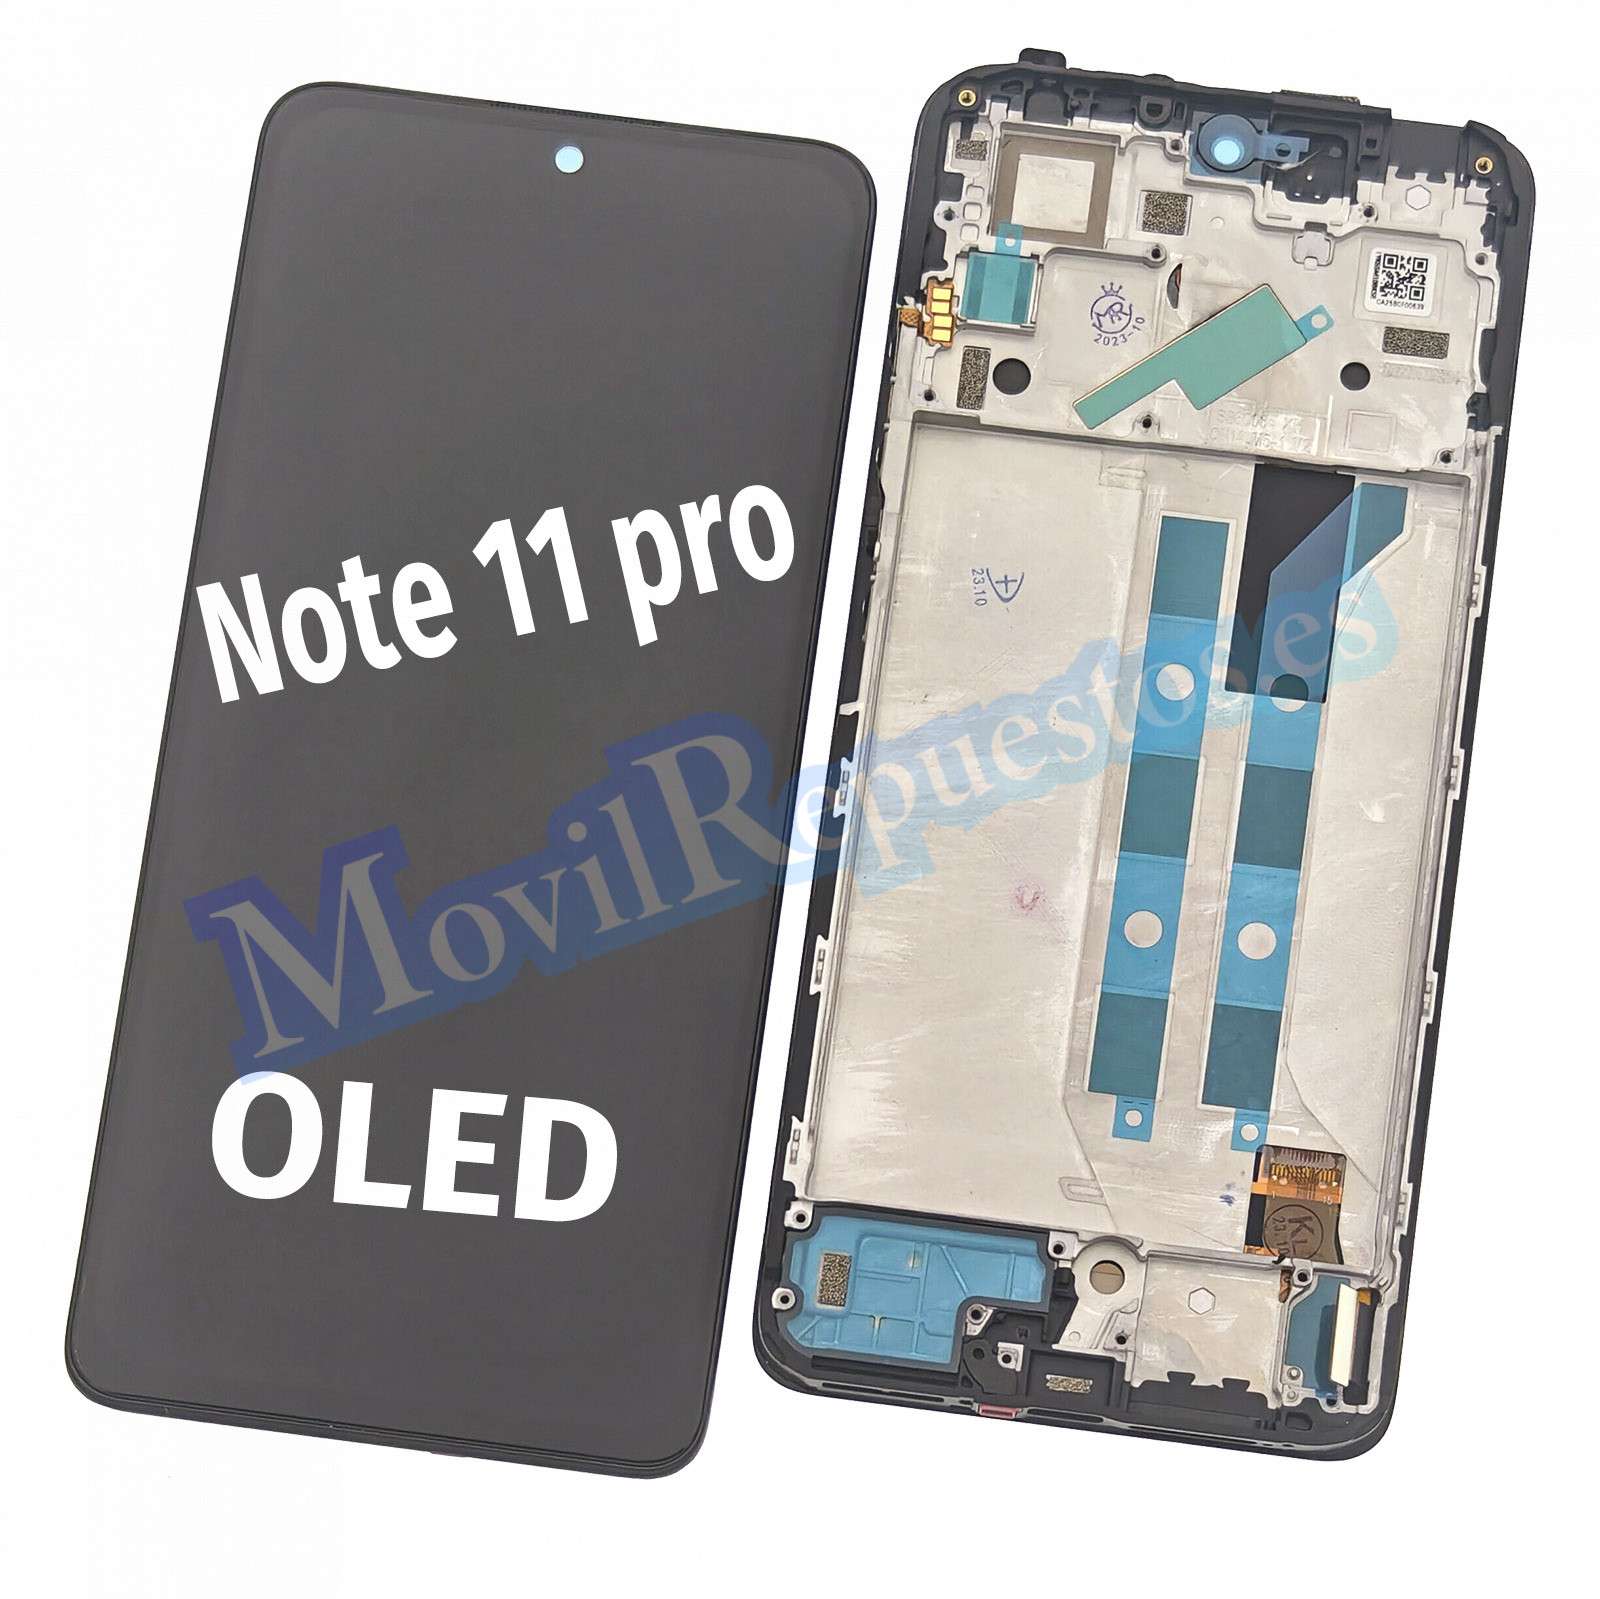 note 11 pro pantalla oled con marco